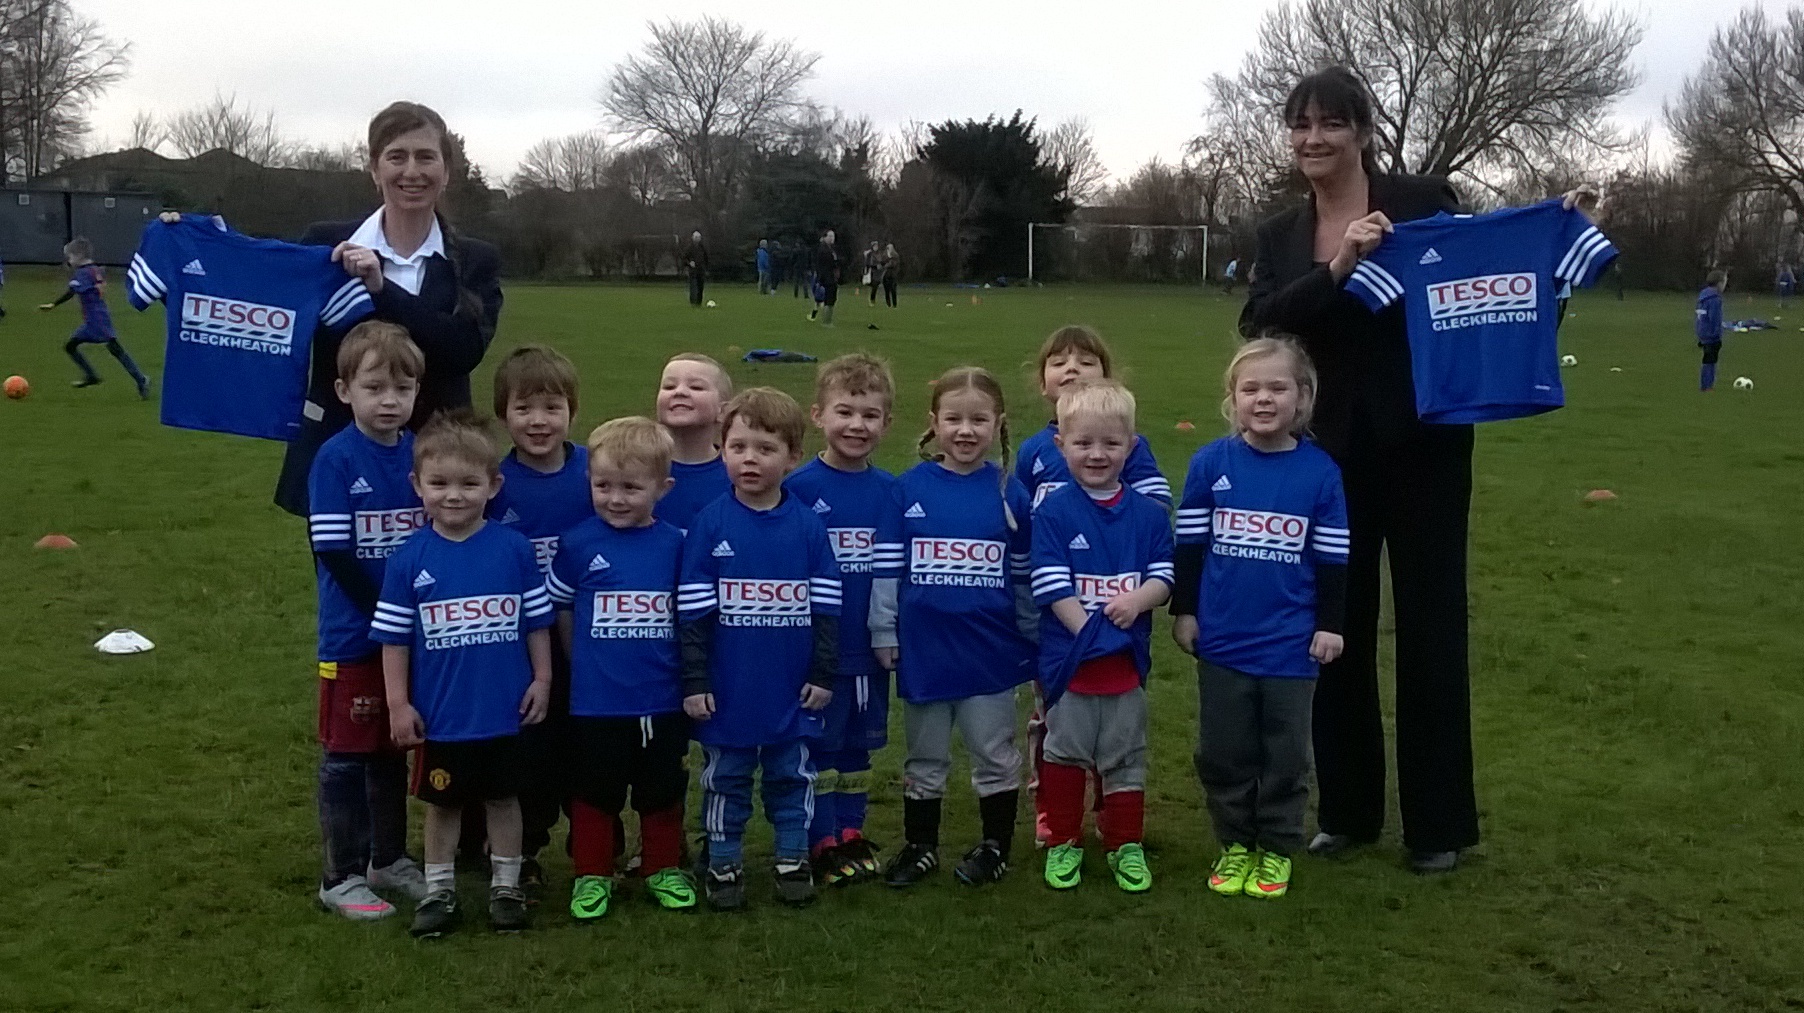 Every little helps as Tesco sponsors football youngsters' shirts